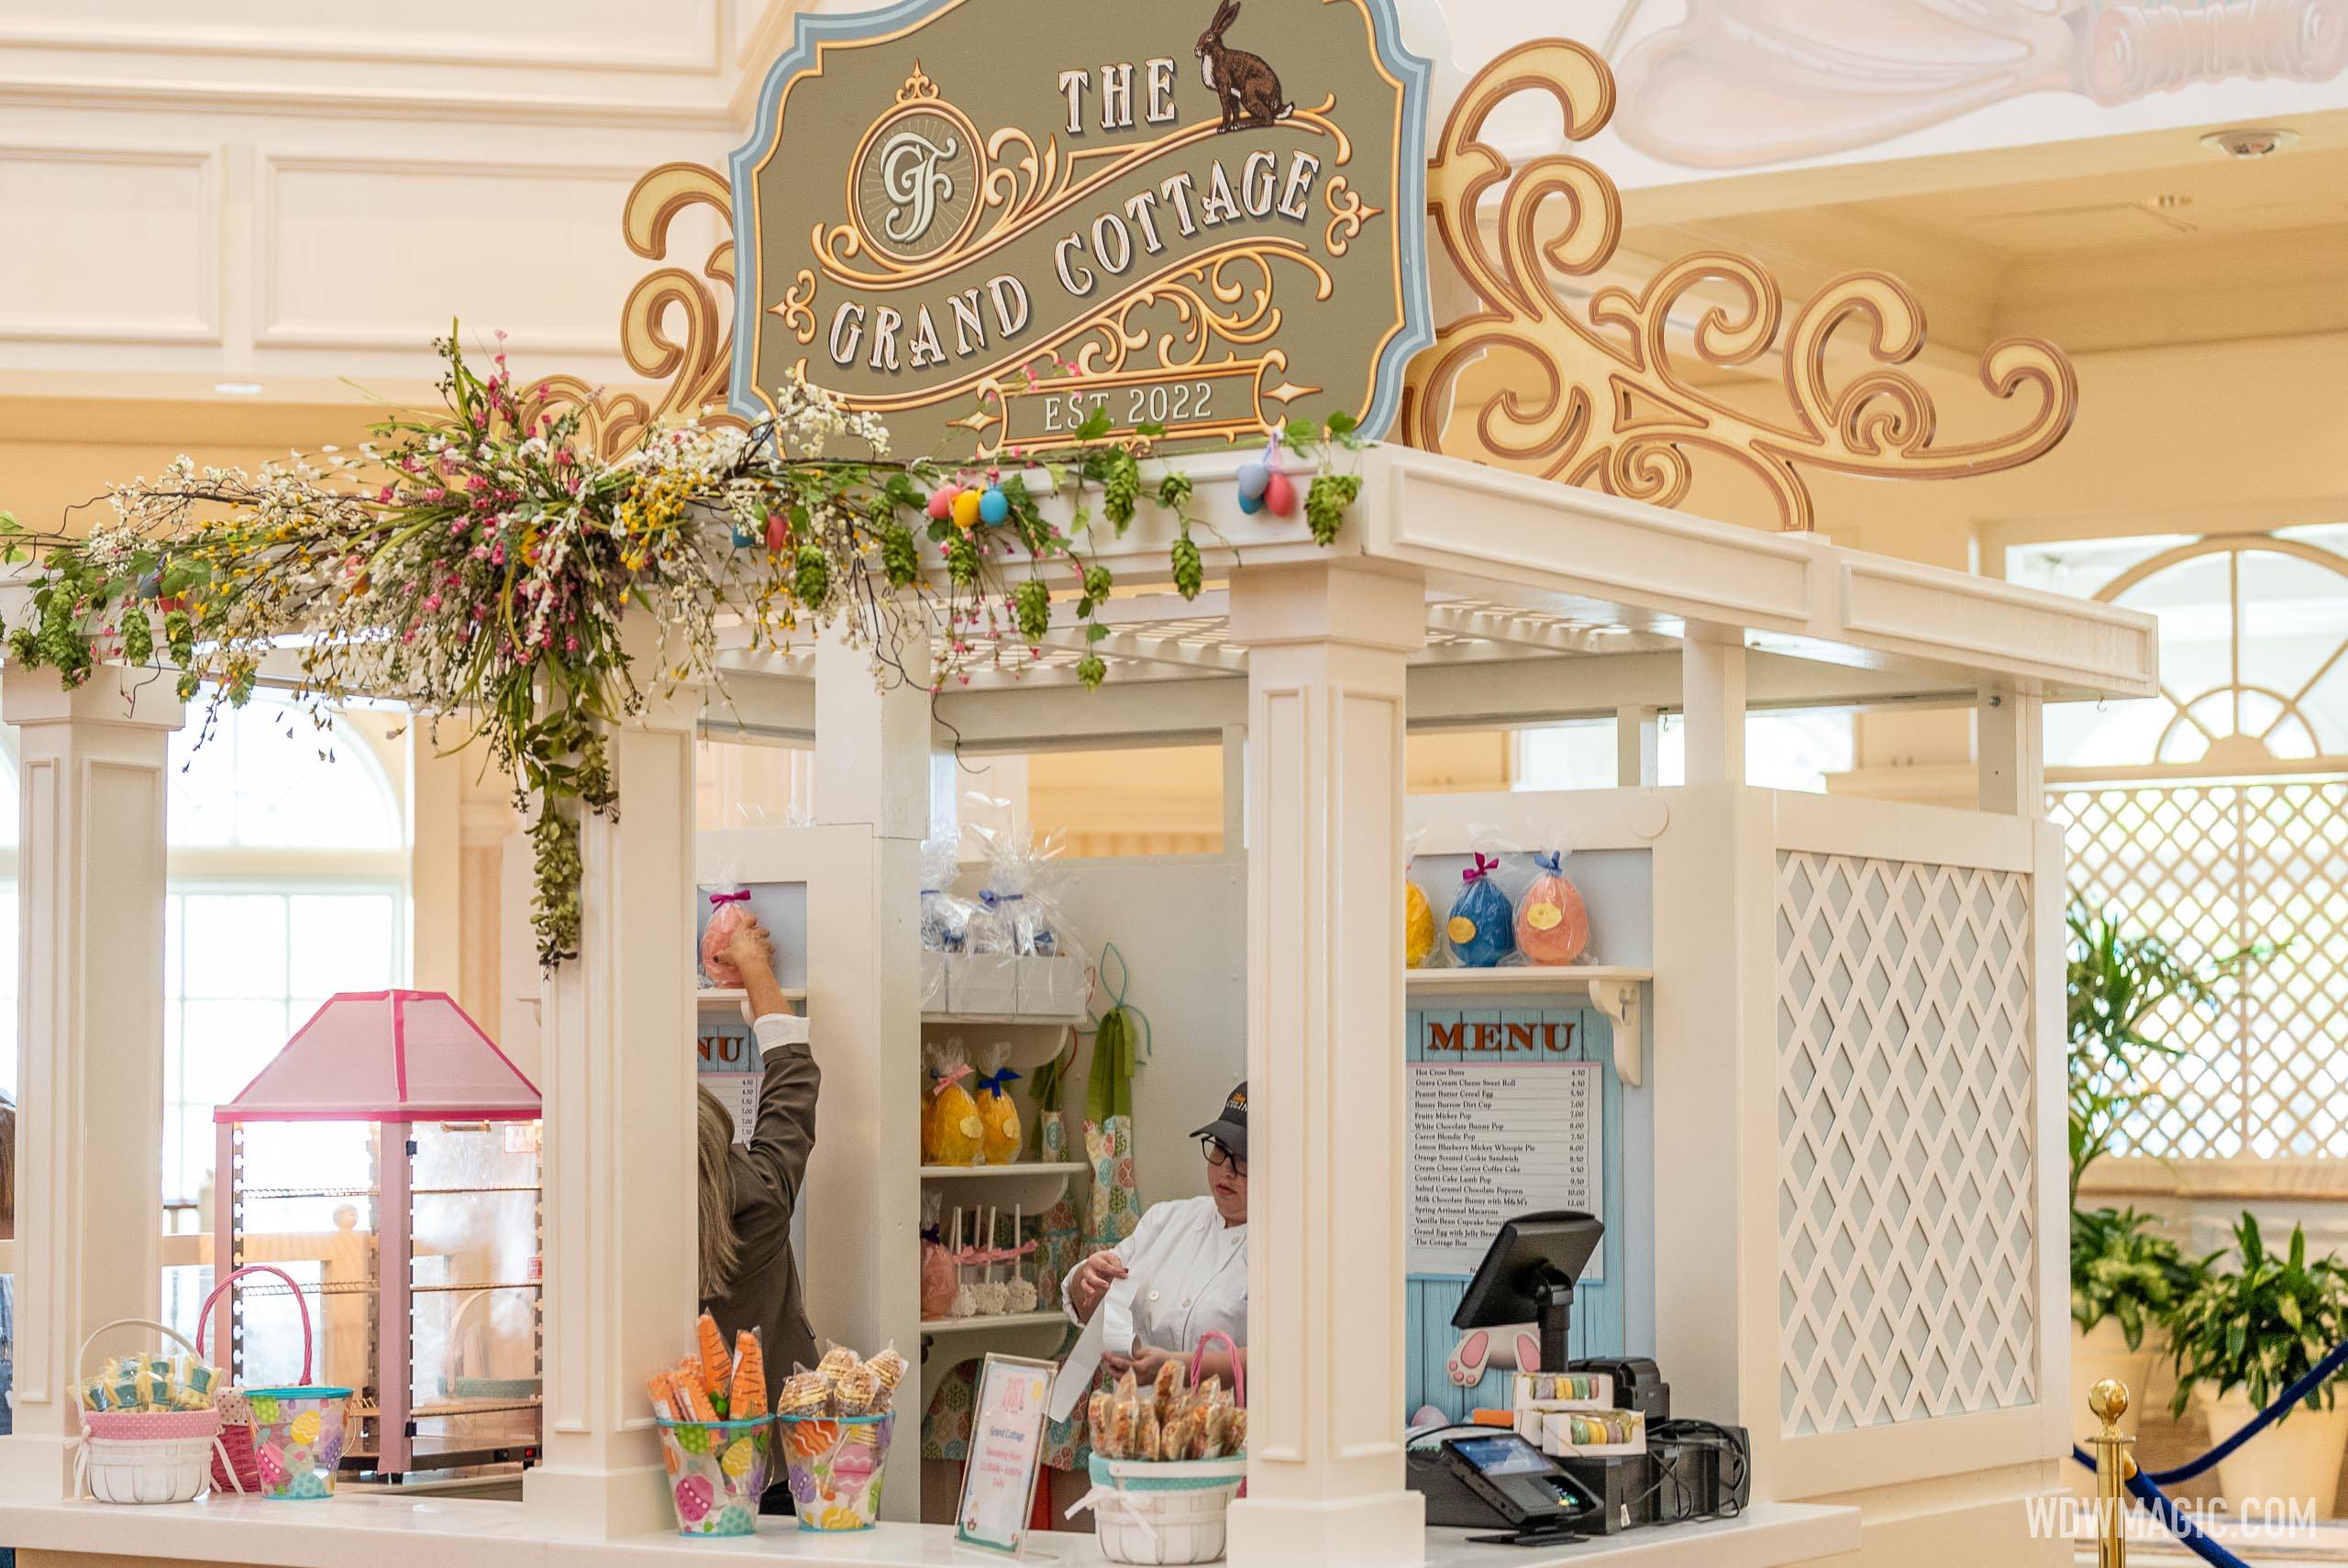 The 2023 Grand Cottage at Disney's Grand Floridian Resort